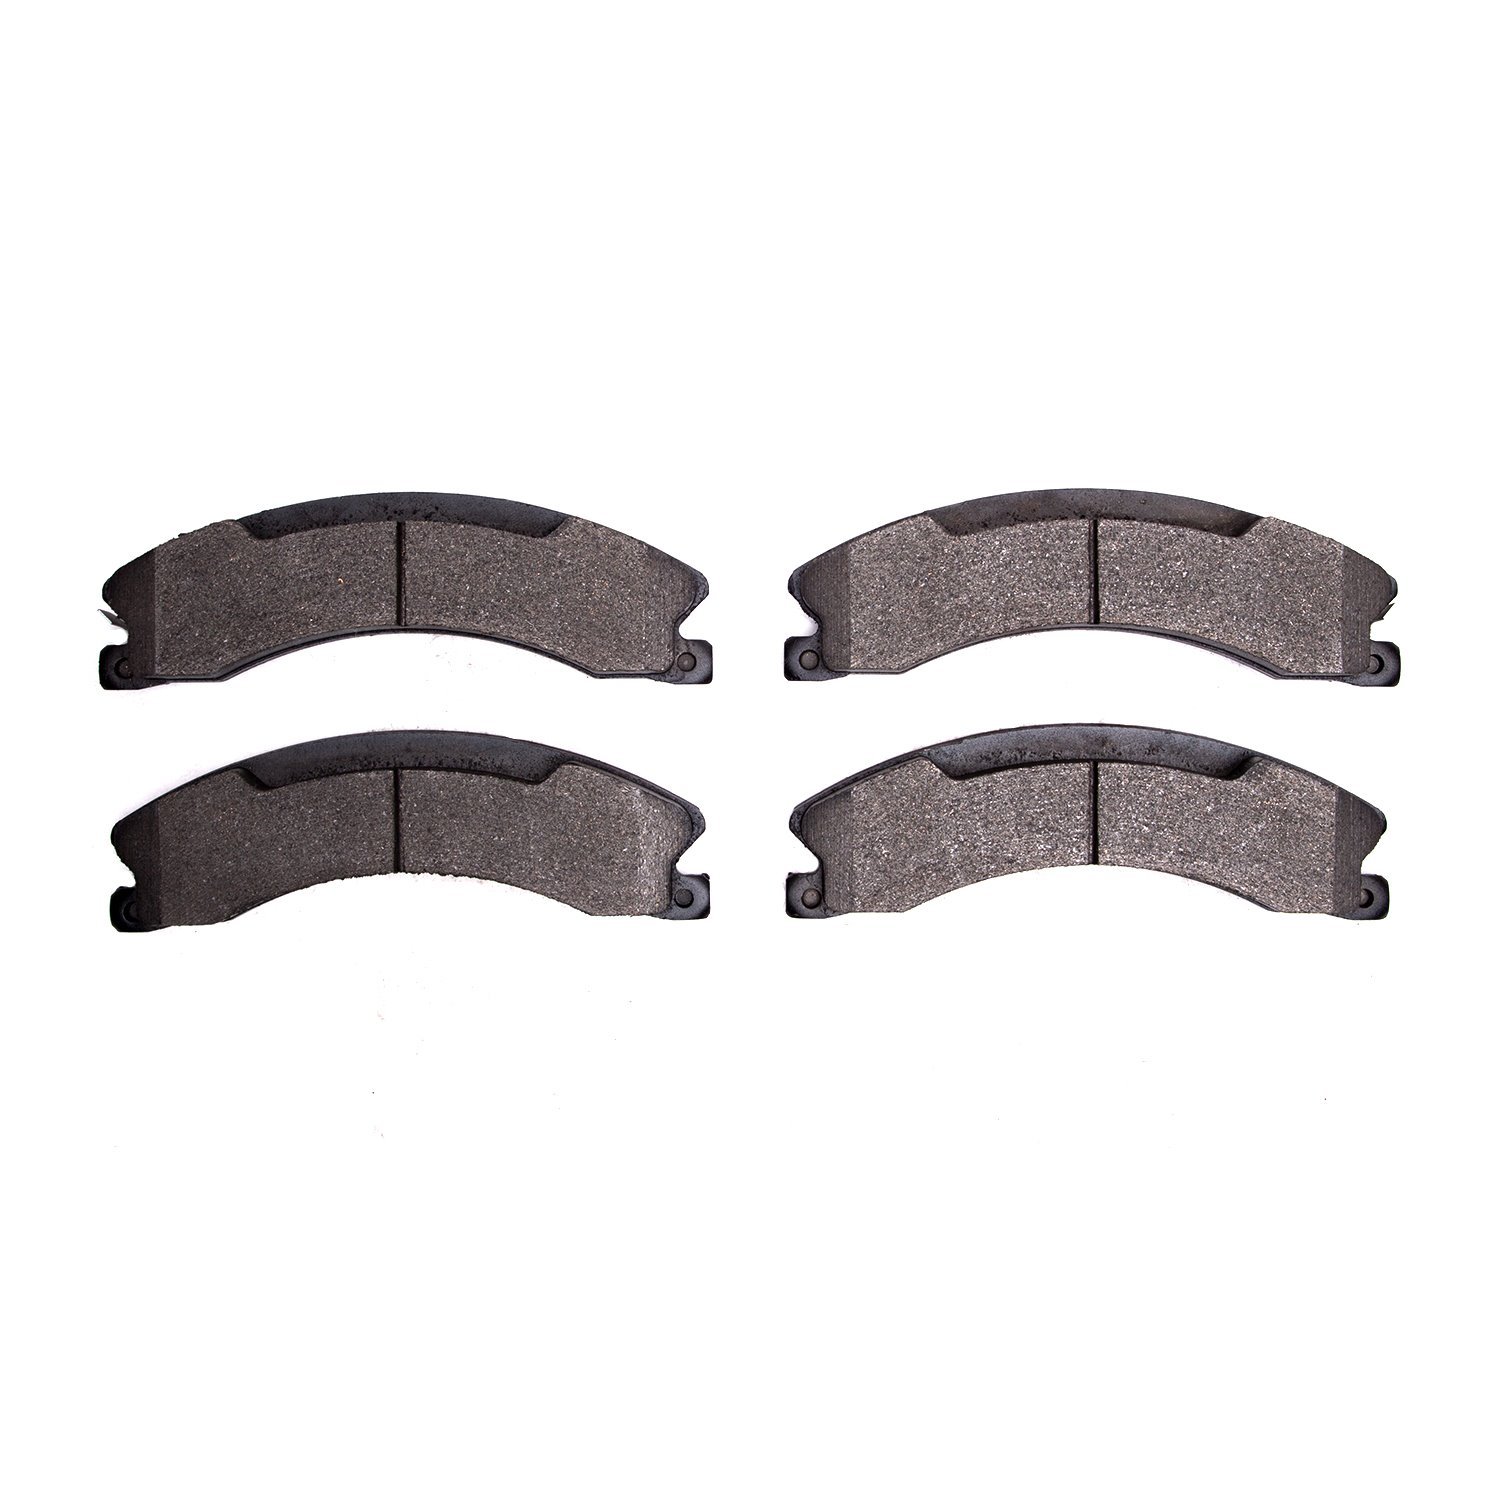 Performance Off-Road/Tow Brake Pads, Fits Select Fits Multiple Makes/Models, Position: Front & Rear